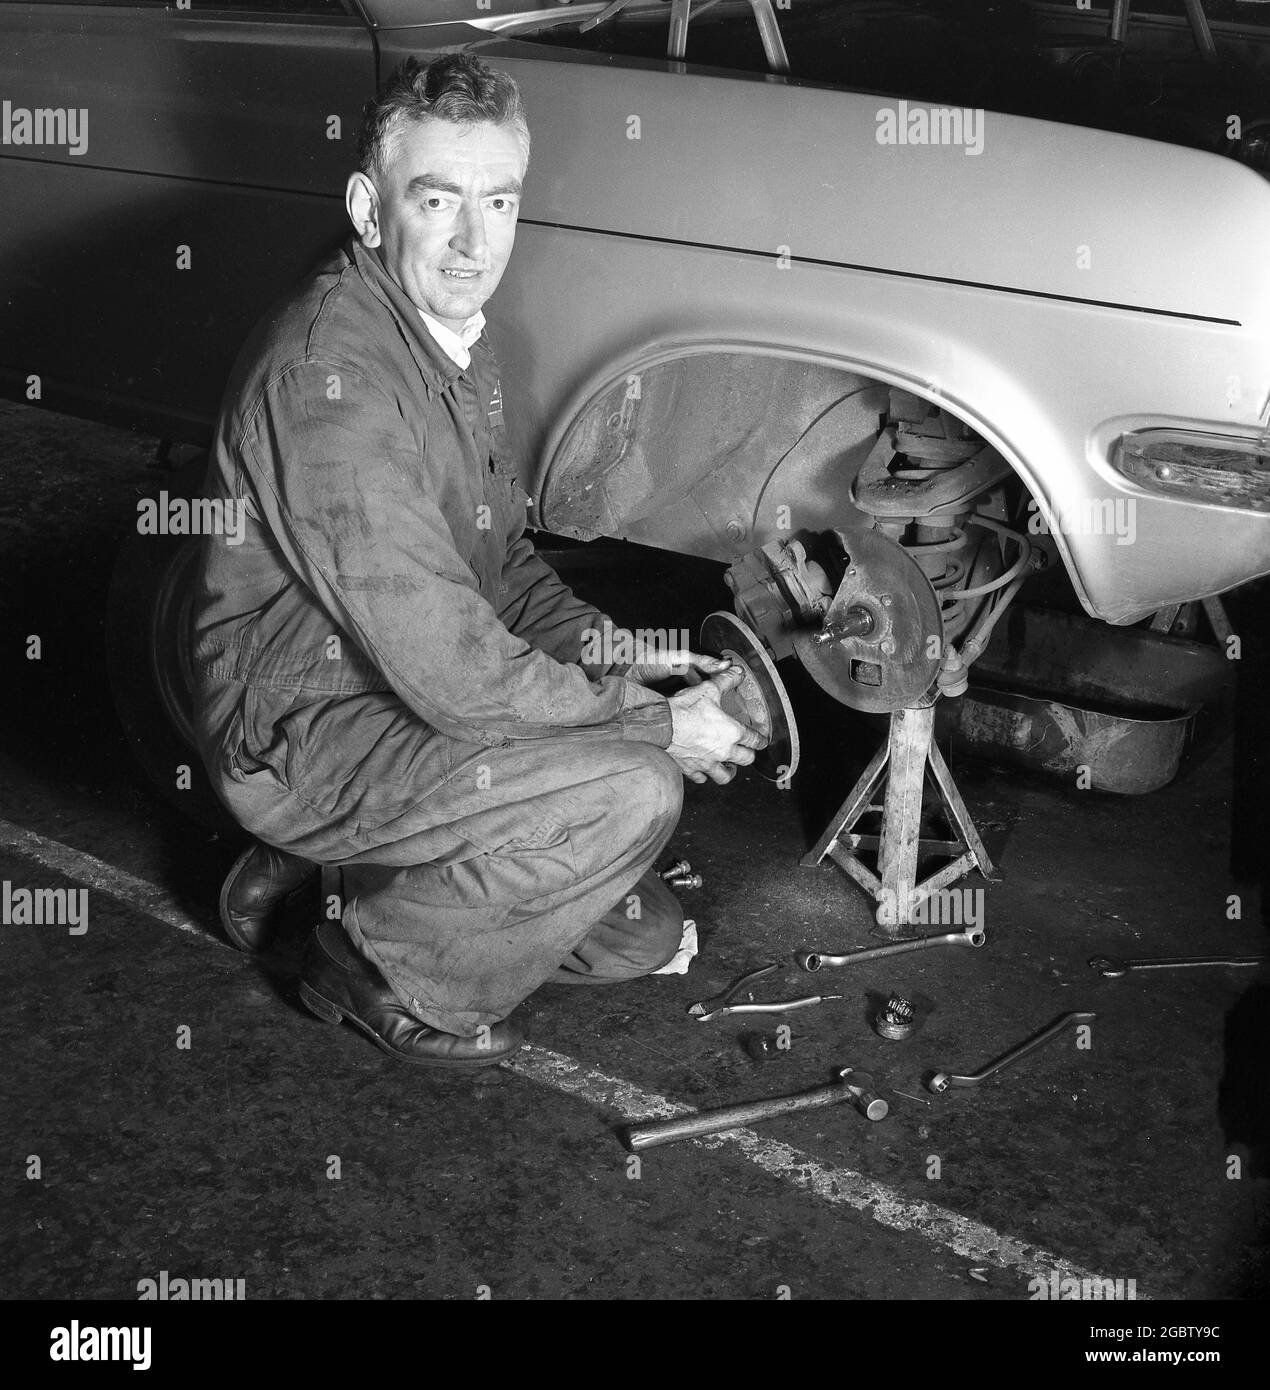 1975, historical, a car mechanic in overalls changing the disc brakes on a front wheel of a motorcar, which is propped up by a small jack or axle stand, England, UK. Stock Photo